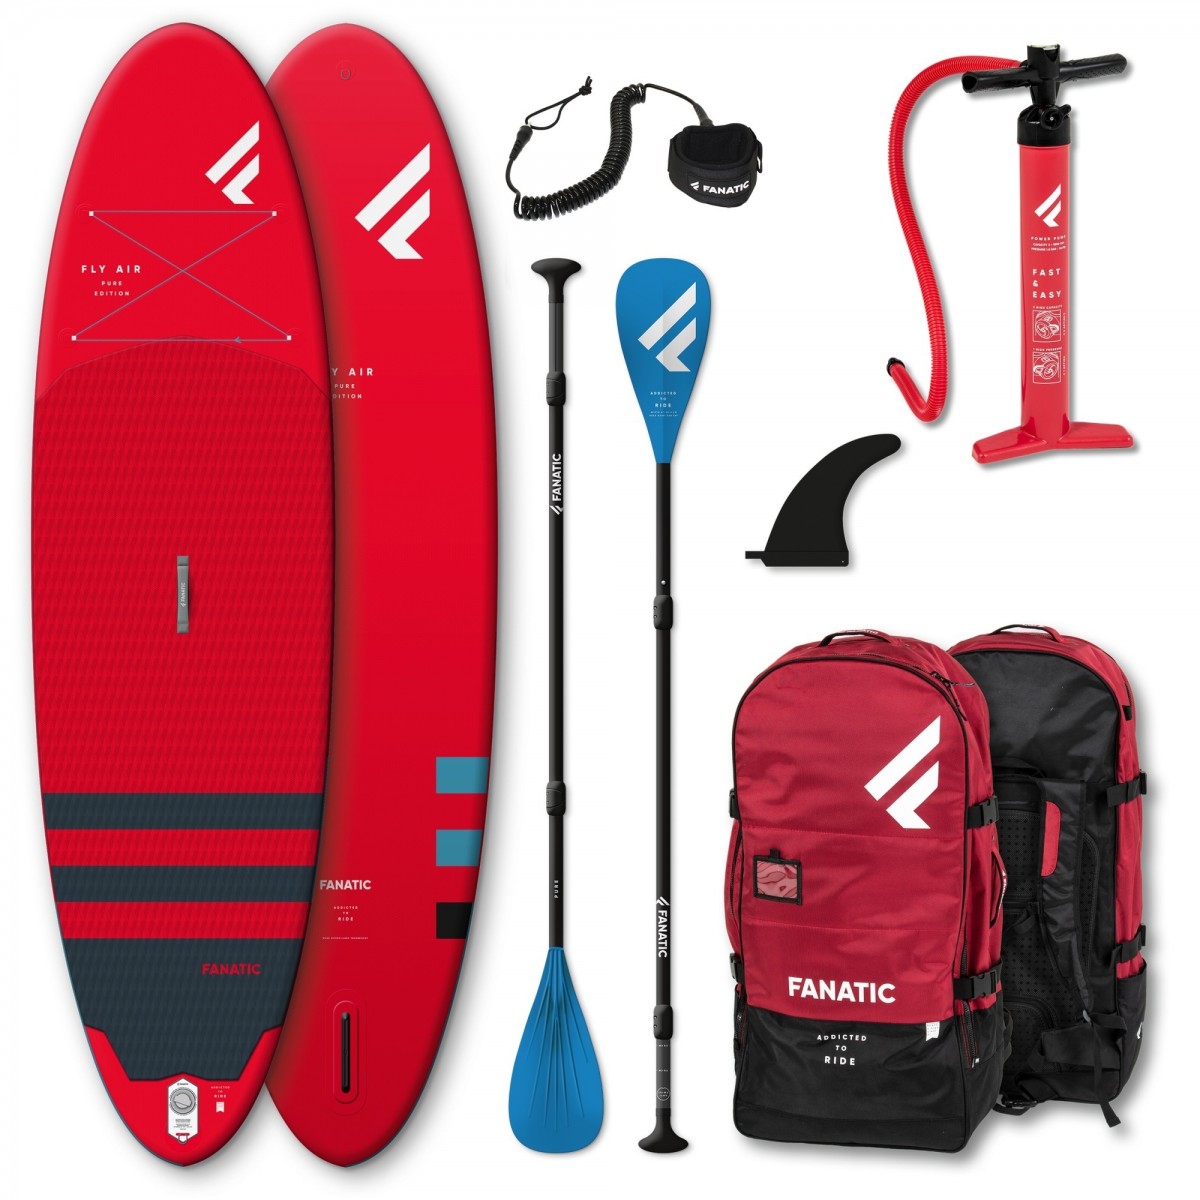 Fanatic fly air pure 10’4 package red ( BEST DEAL )